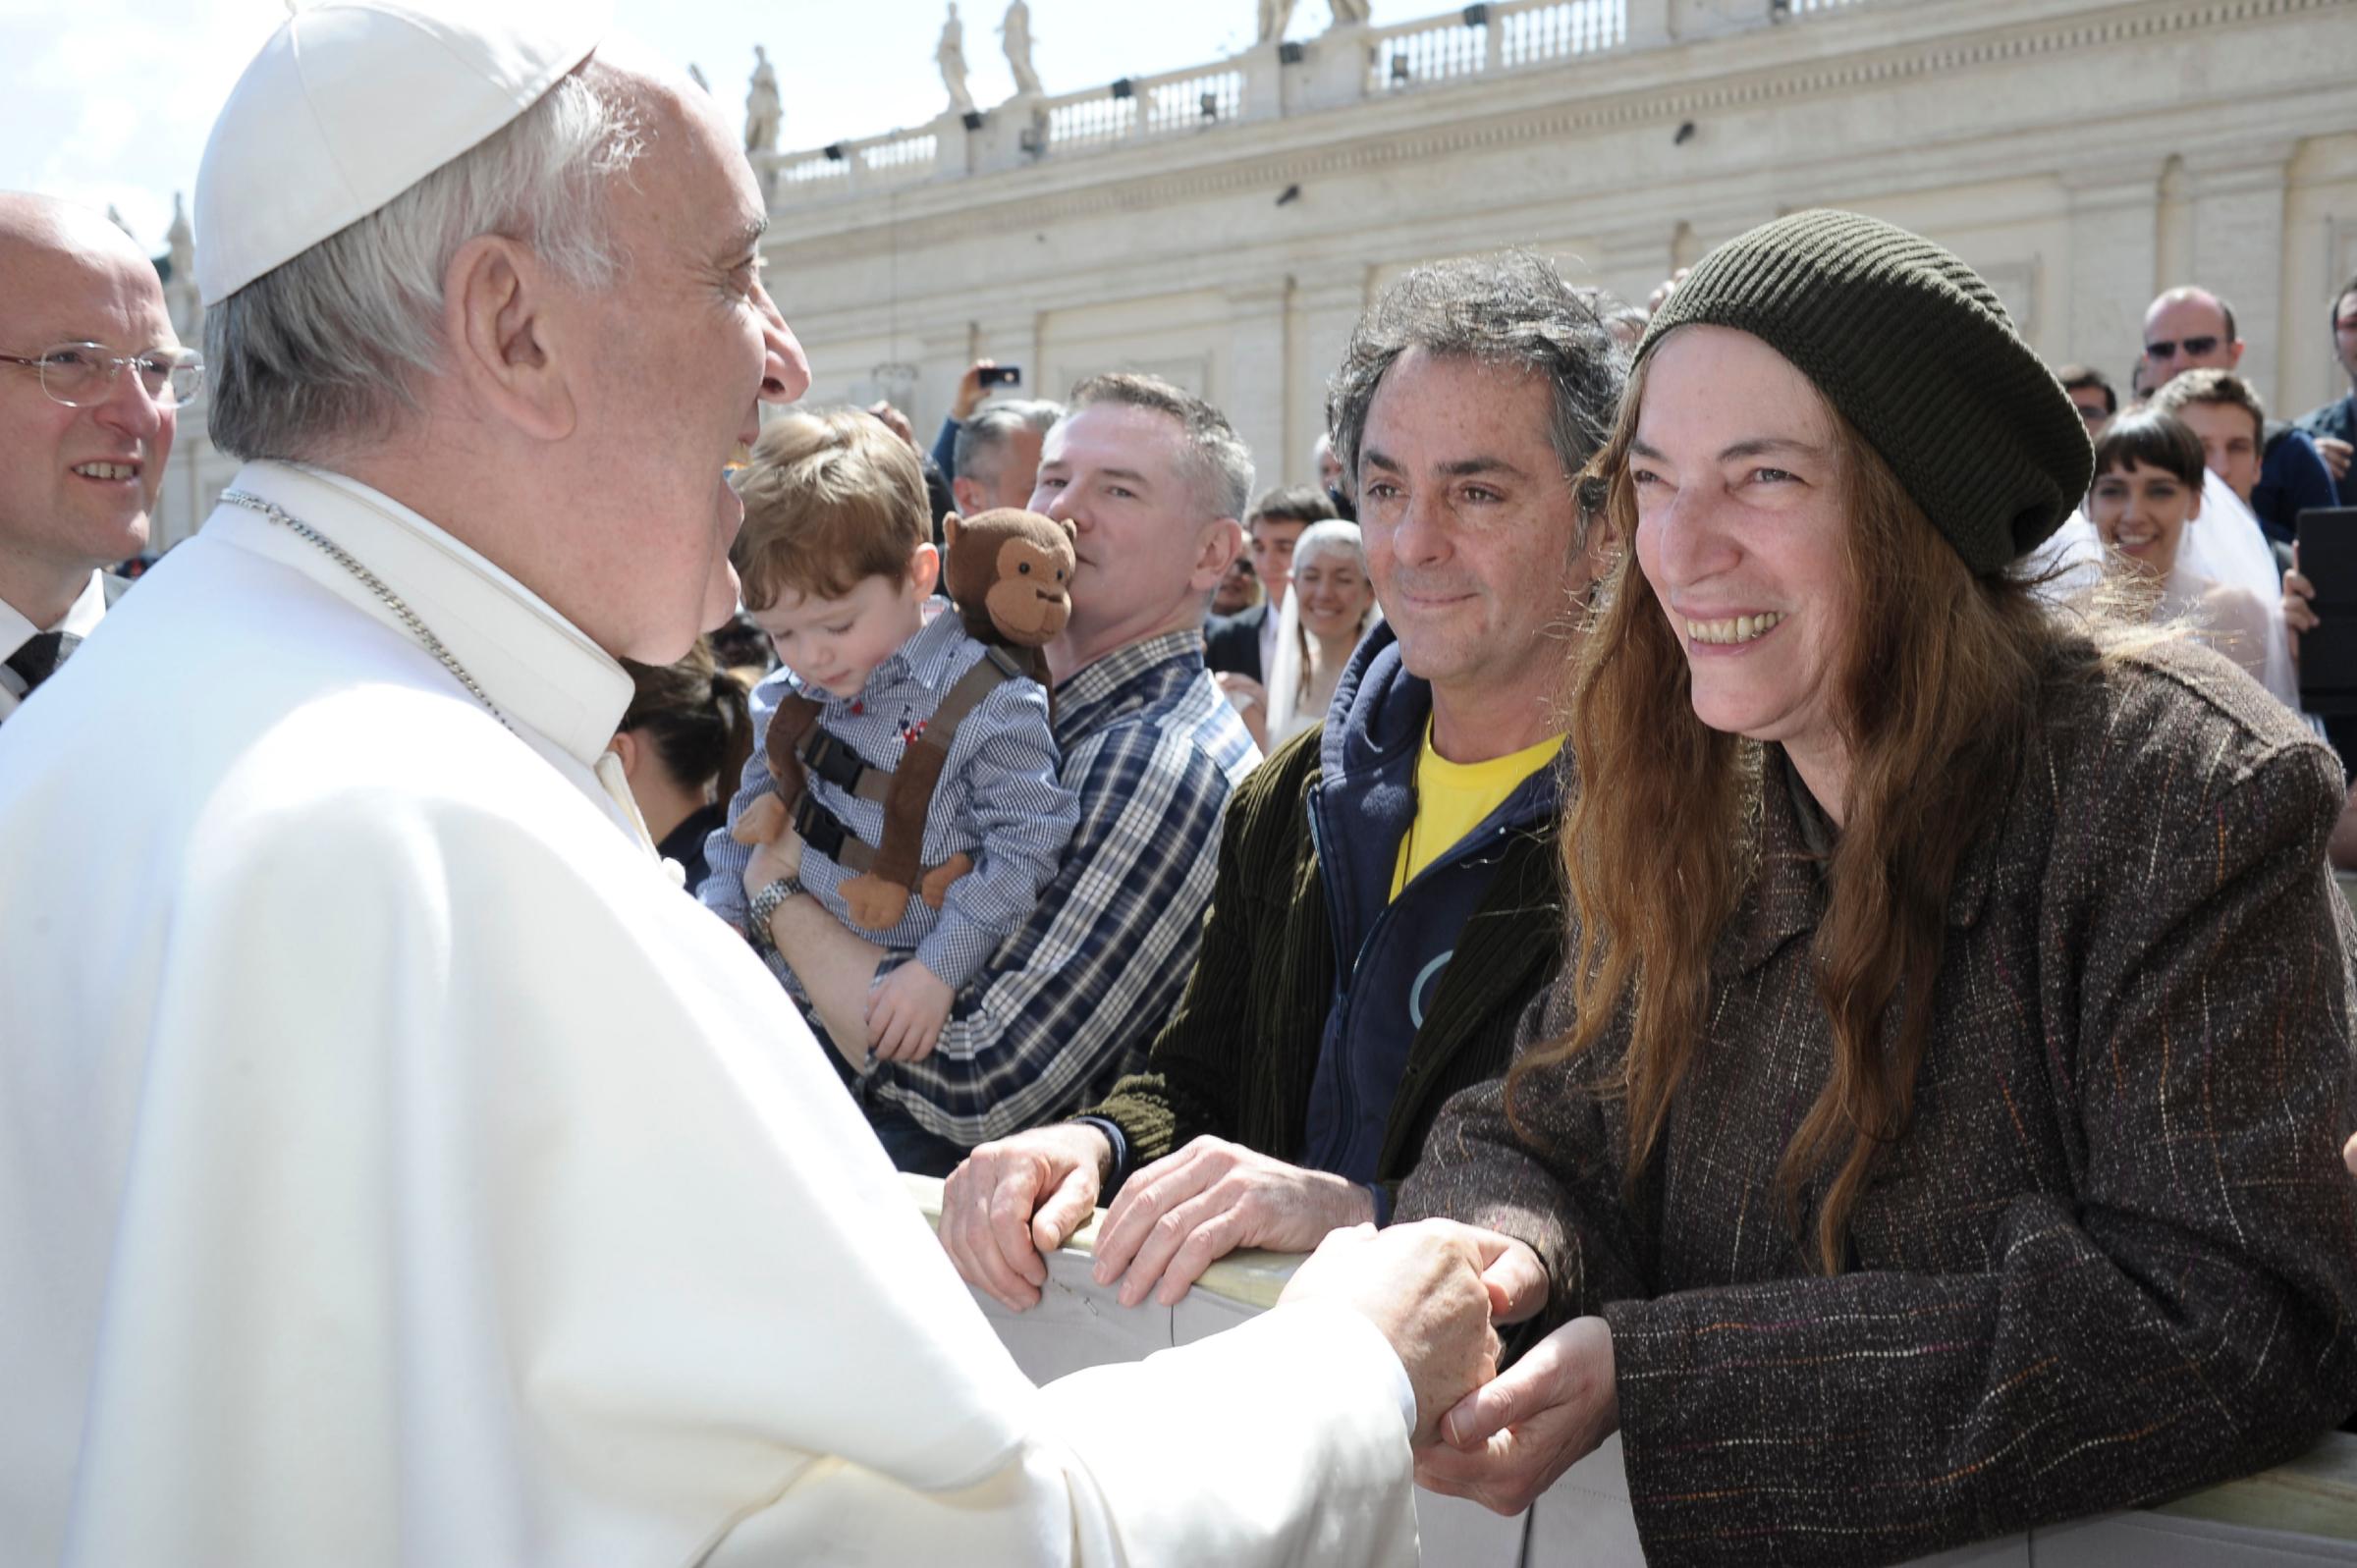 Pope Francis greets Patti Smith on April 10, 2013 at the Vatican.